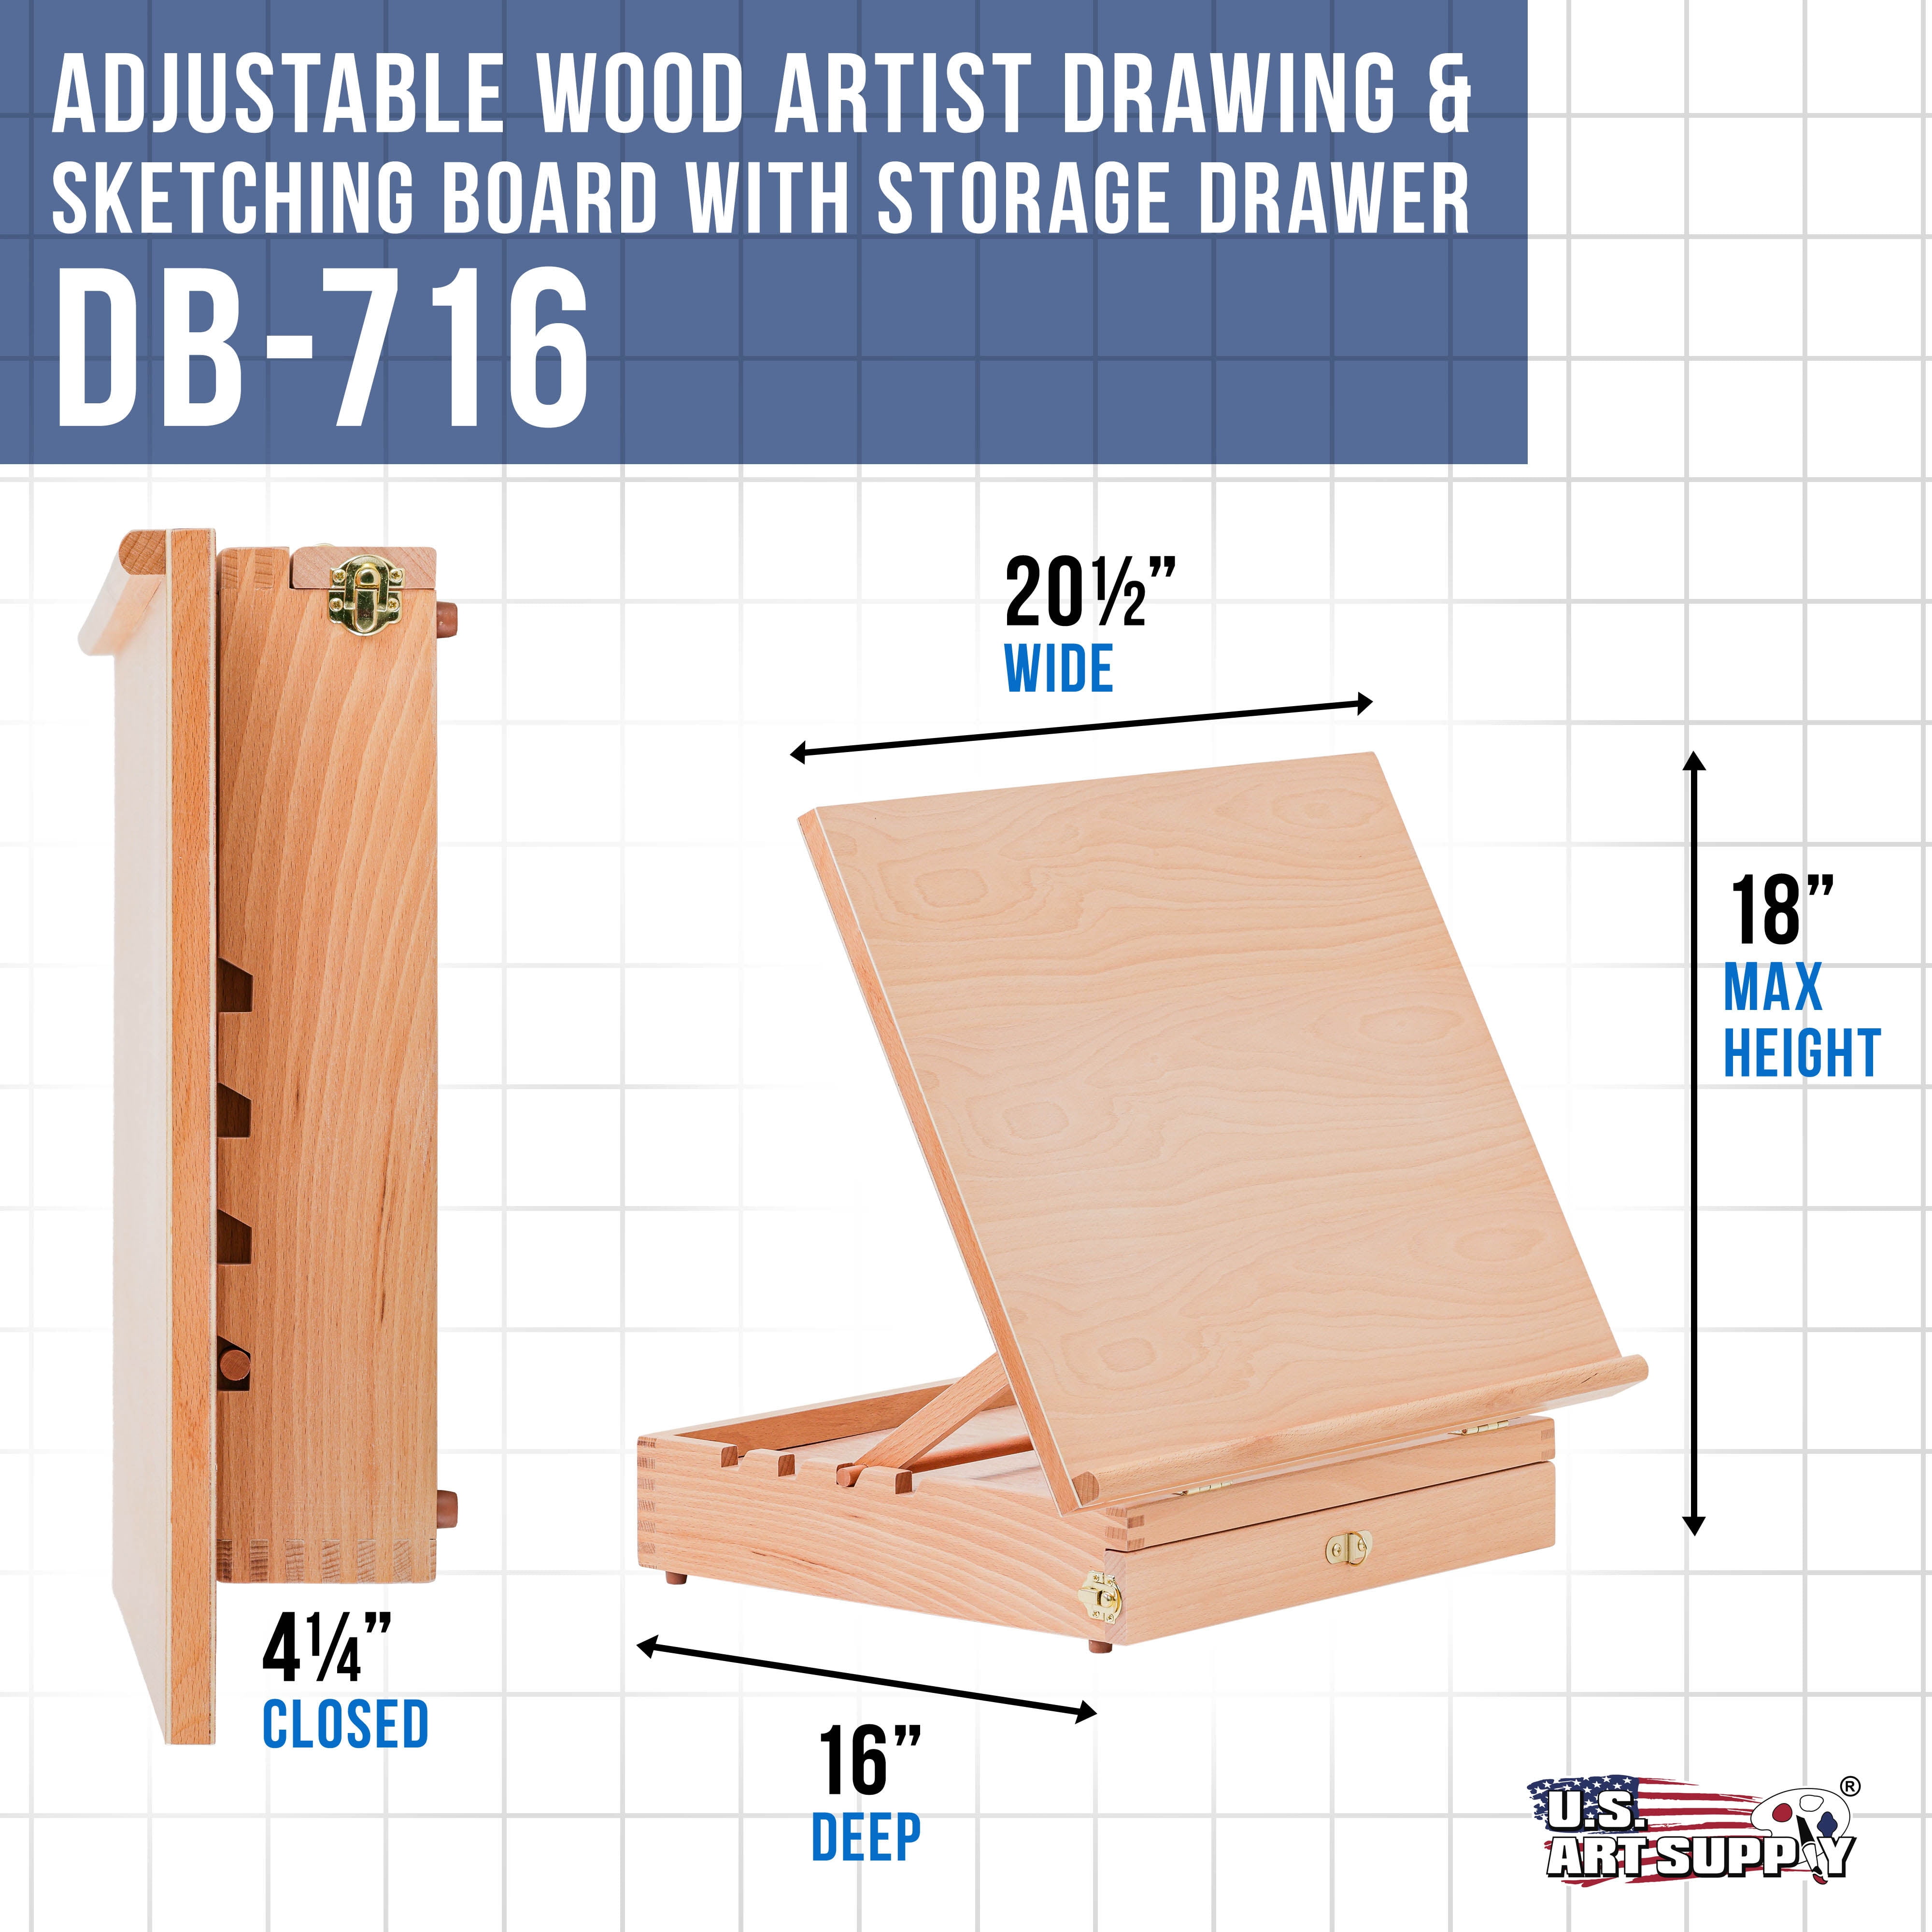 US Art Supply Extra Large Adjustable Wood Artist Drawing & Sketching Board  26 Wide x 21 Tall bundle with 11 x 14 Side Spiral Bound - 60lb Sketch